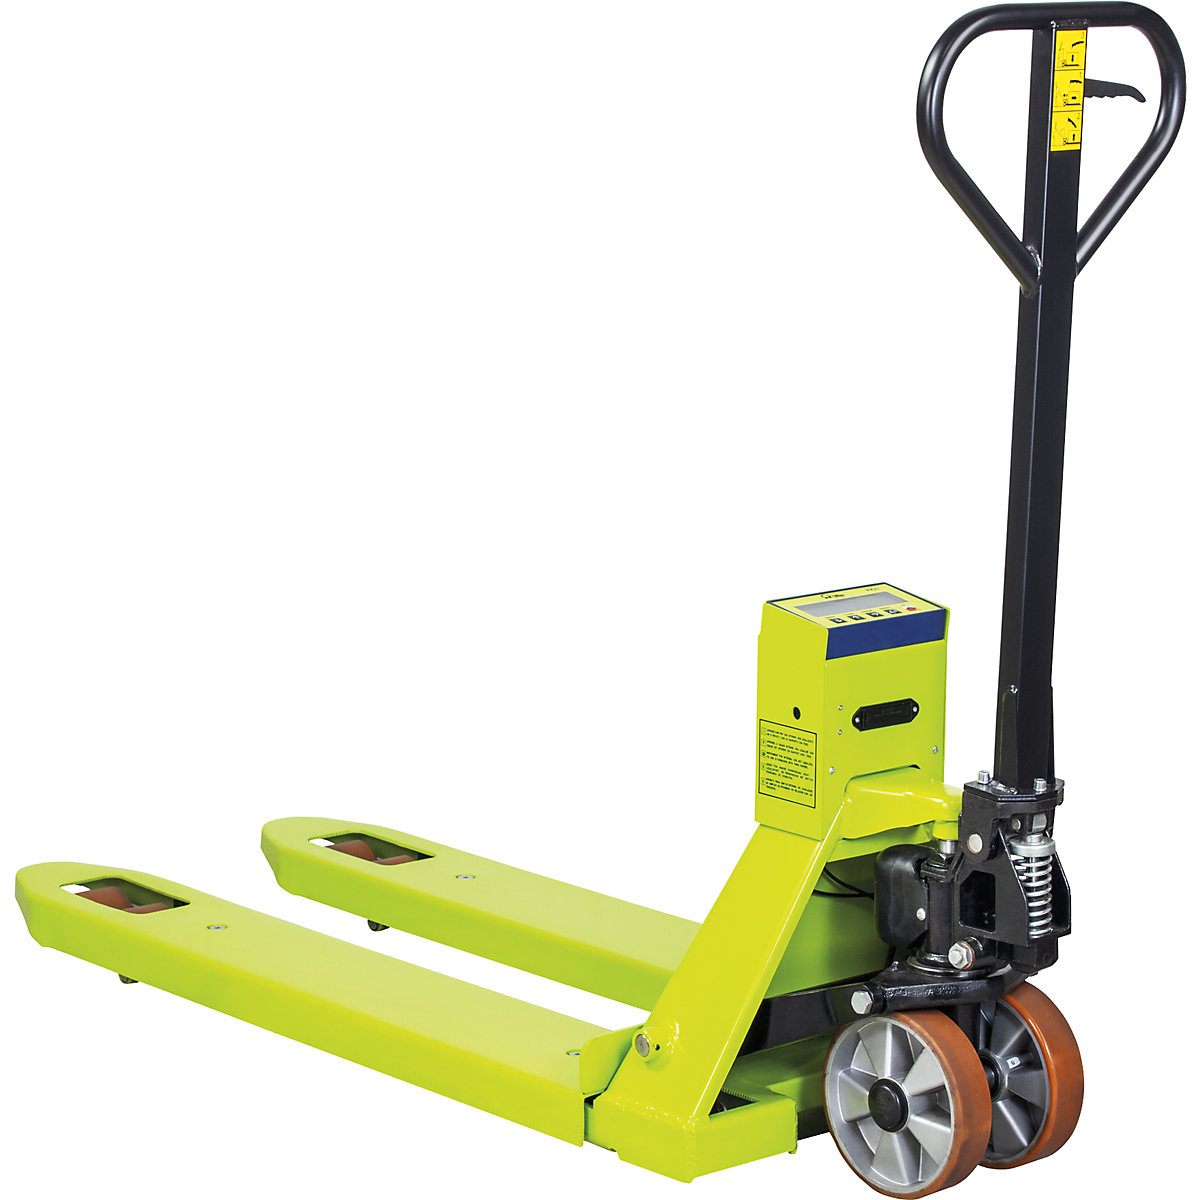 Pramac – Pallet truck with scales, max. load 2500 kg, overall length 1596 mm